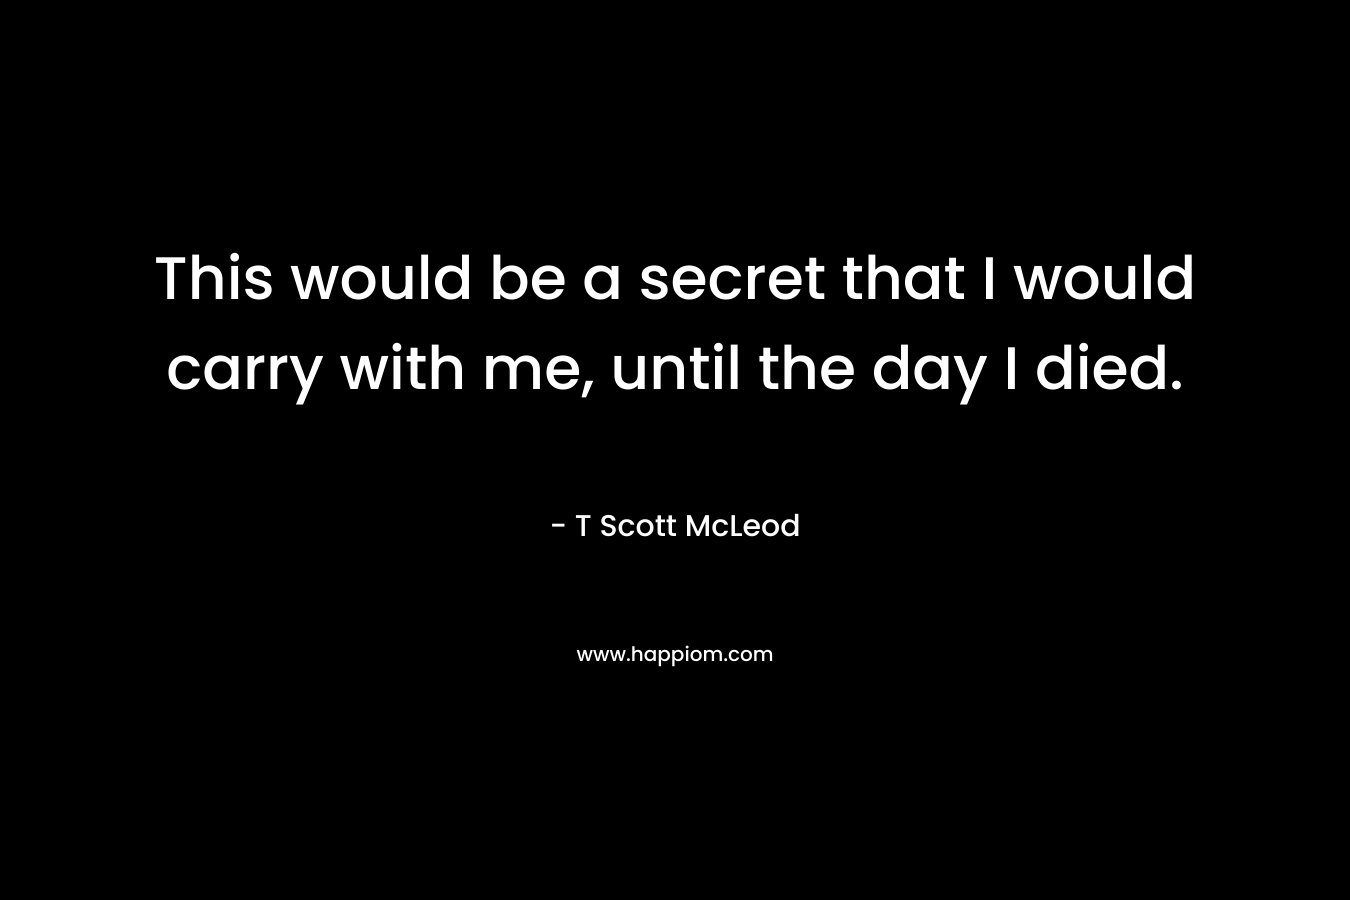 This would be a secret that I would carry with me, until the day I died. – T Scott McLeod